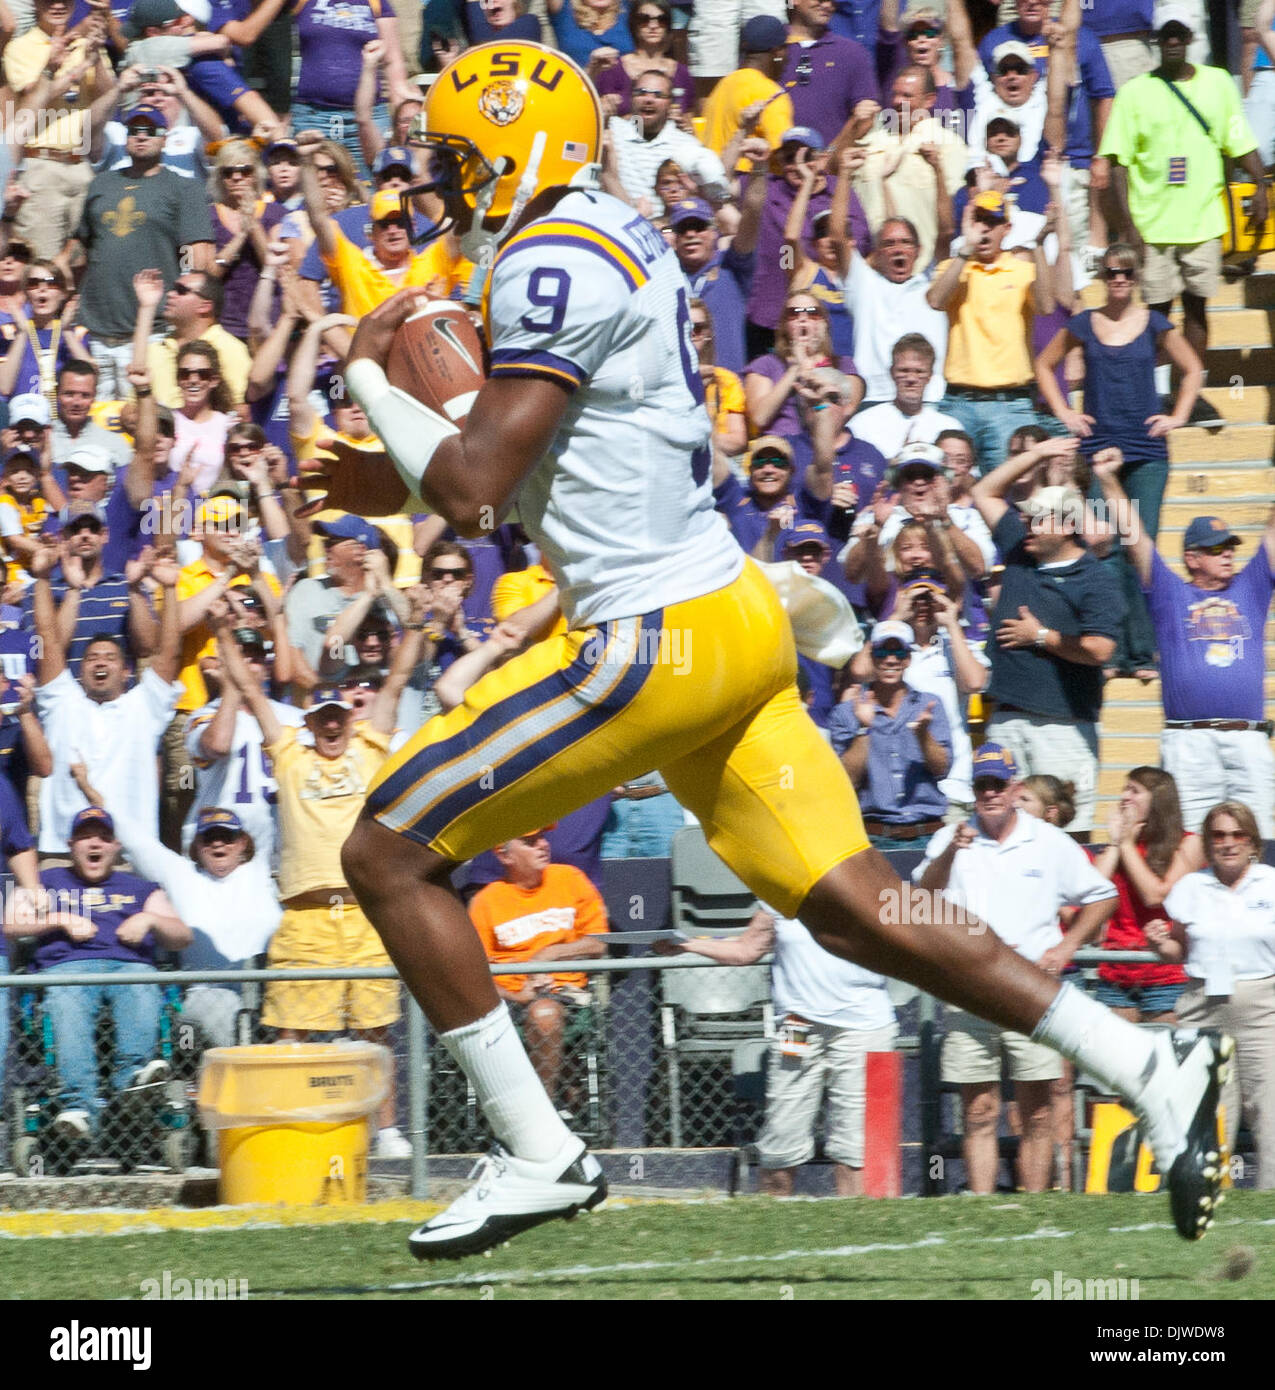 Oct. 2, 2010 - Baton Rouge, Louisiana, United States of America - LSU Tigers quarterback Jordan Jefferson (9) runs in for 86 yards touch down during the first half of NCAA Southeastern Conference at tiger stadium Baton Rouge, Louisiana.  LSU Tigers 7 Tennessee 7 during the first half. (Credit Image: © Gus Escanelle/Southcreek Global/ZUMApress.com) Stock Photo